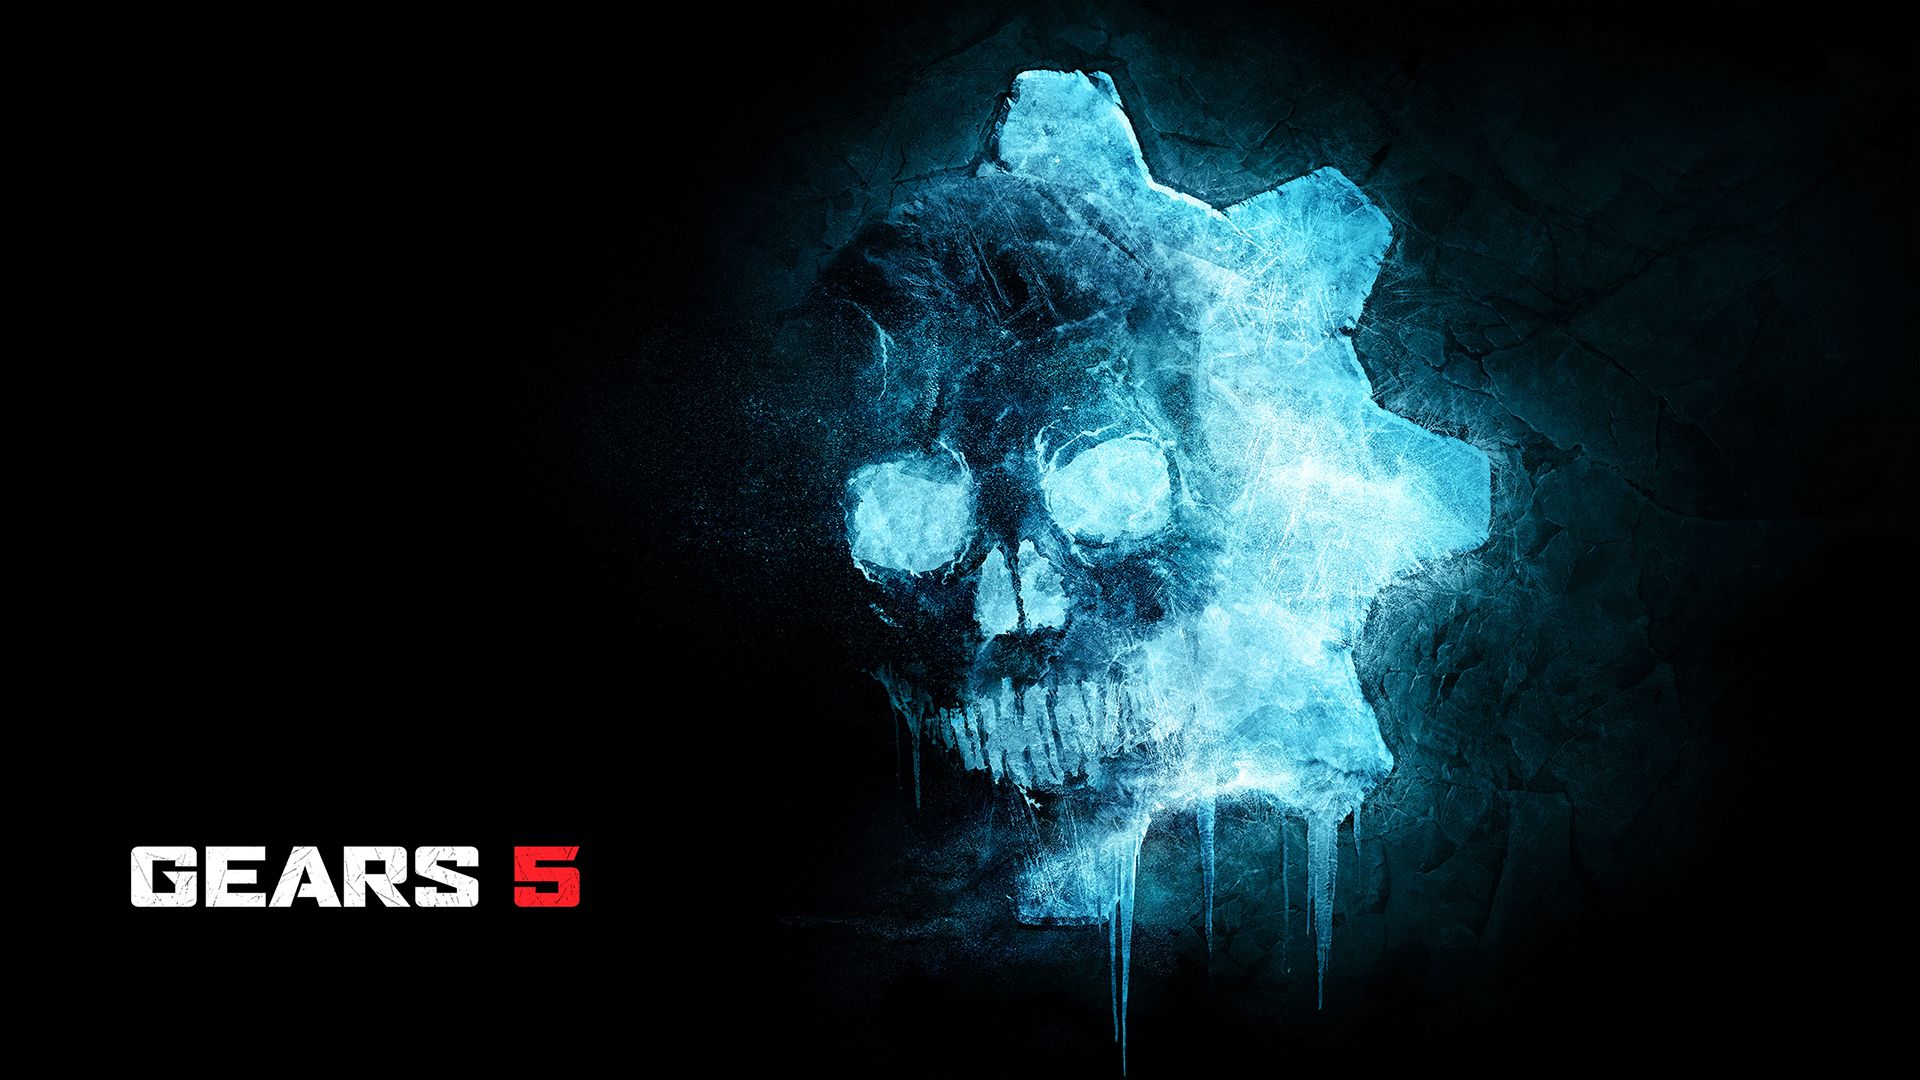 Gears 5 Desktop and Xbox Background